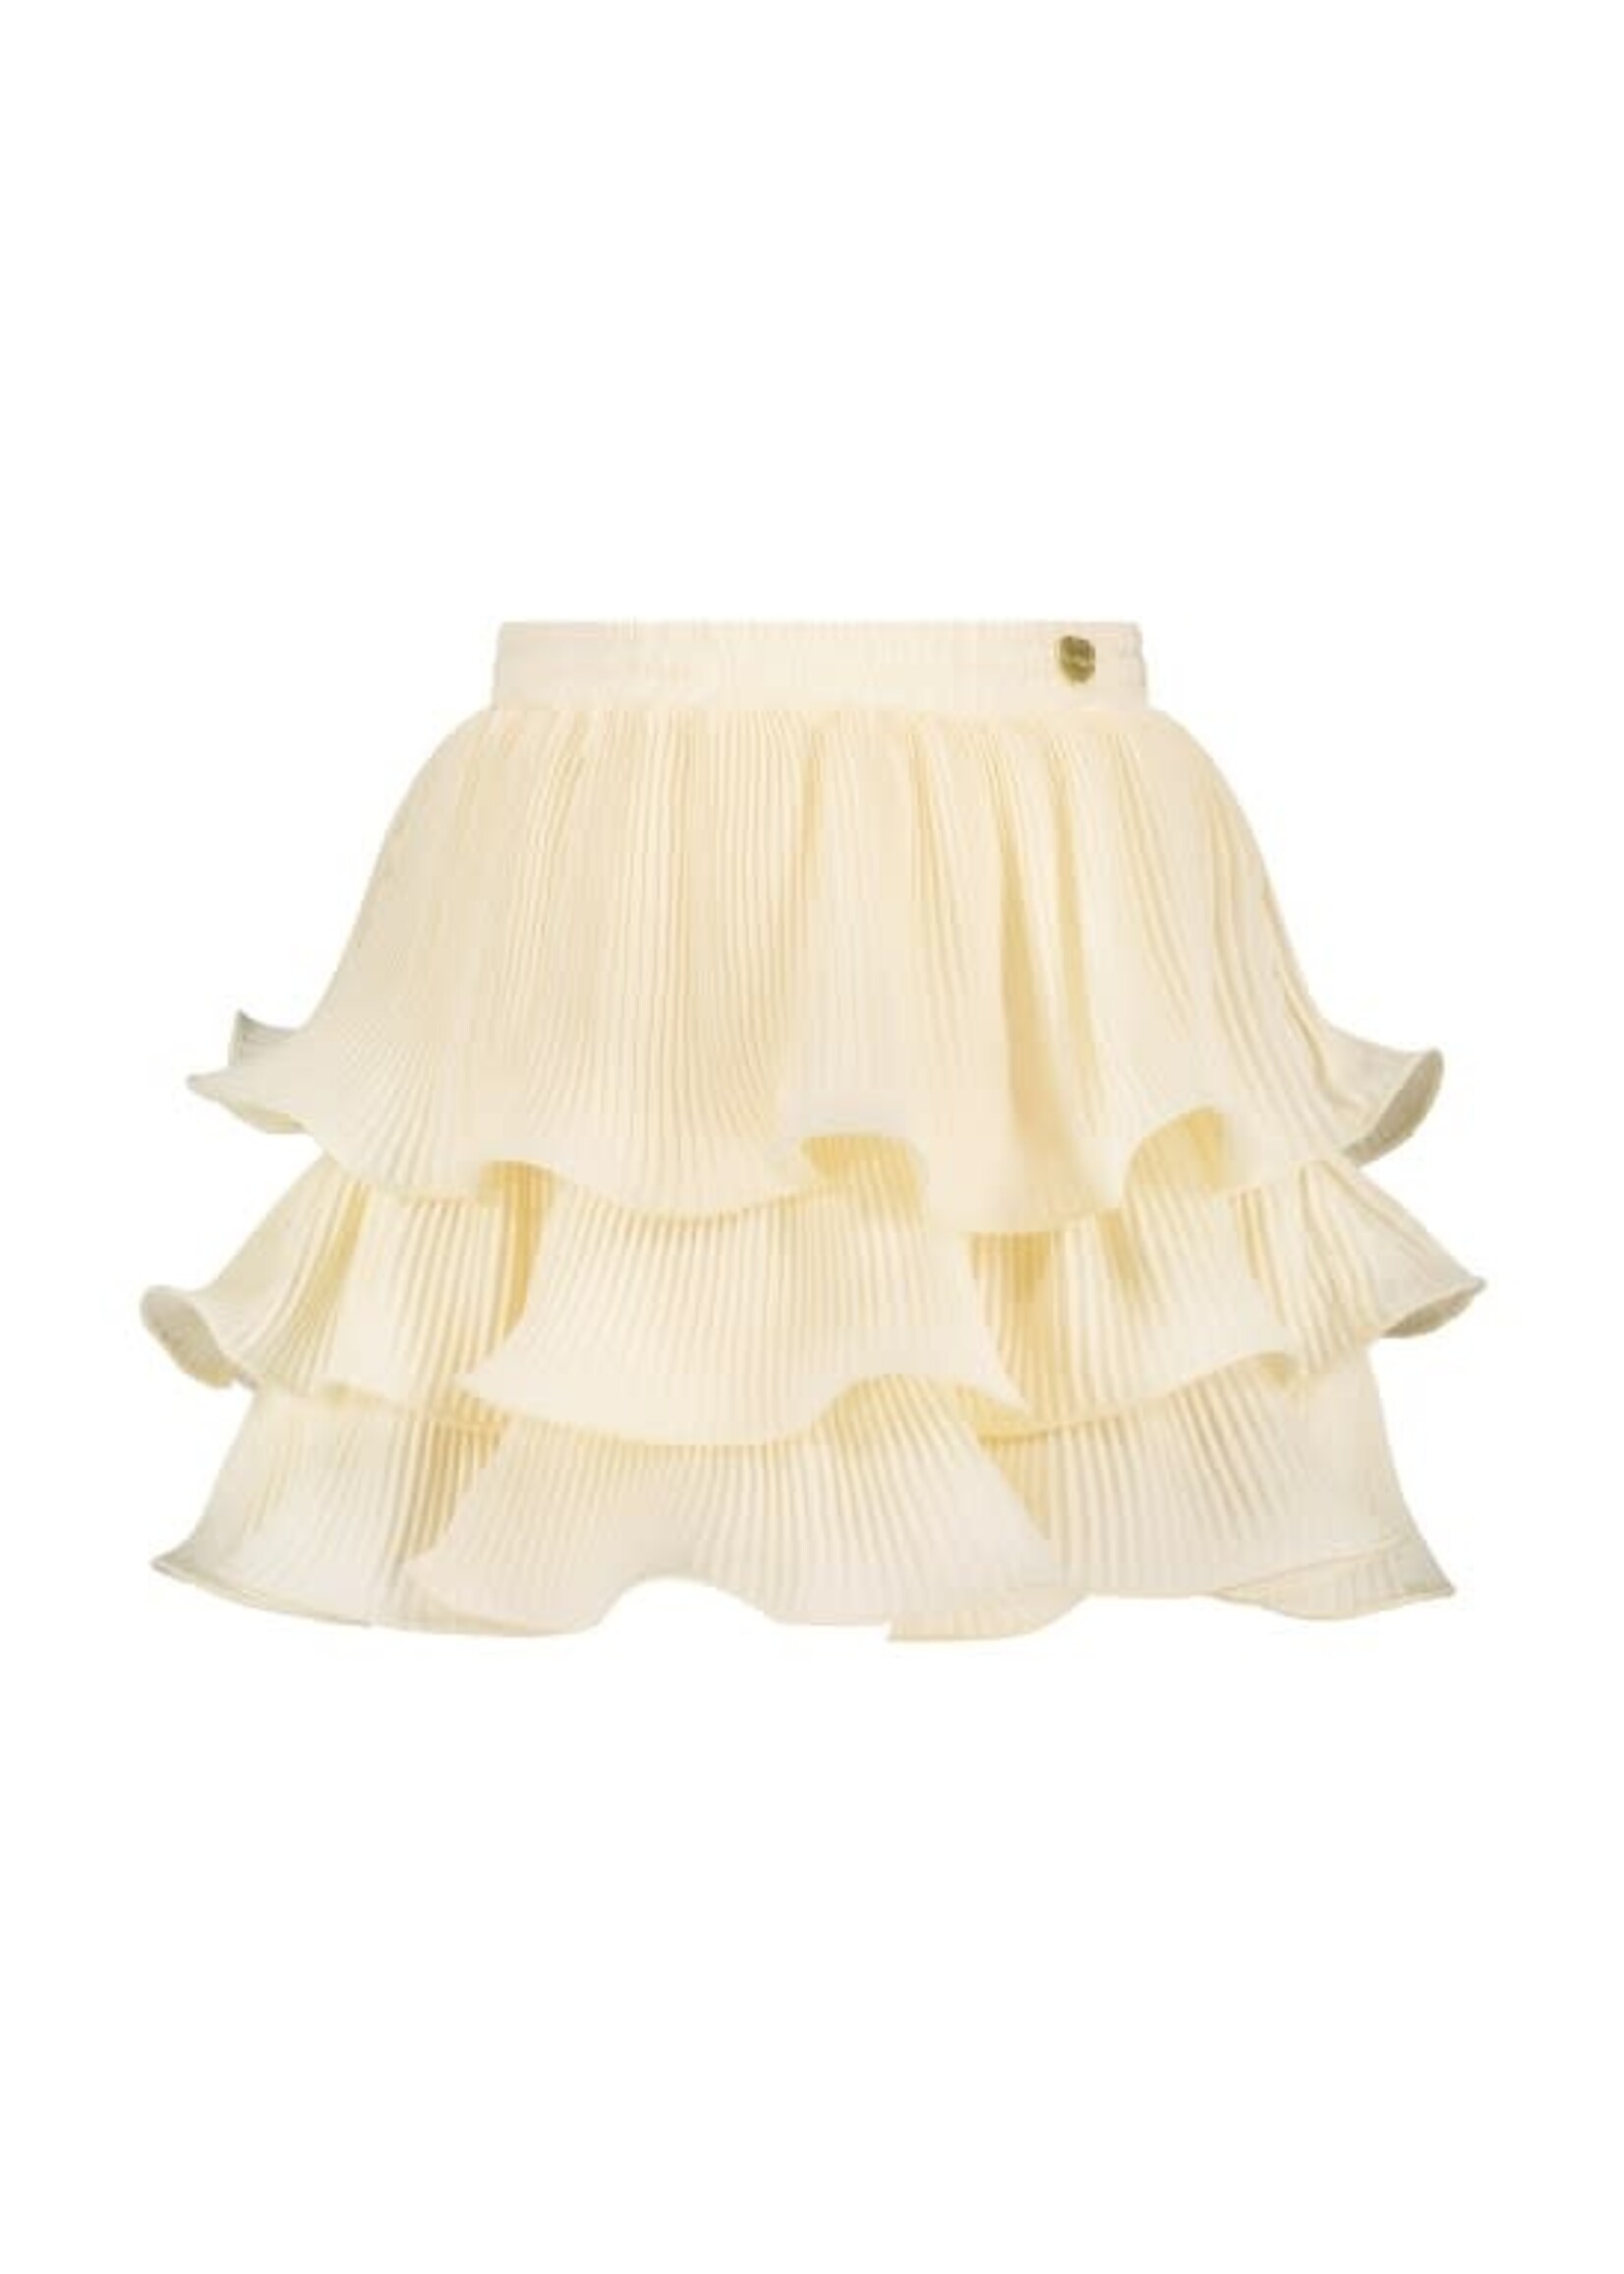 Le Chic Le Chic TESRA plisée skirt C312-5730 Pearled Ivory